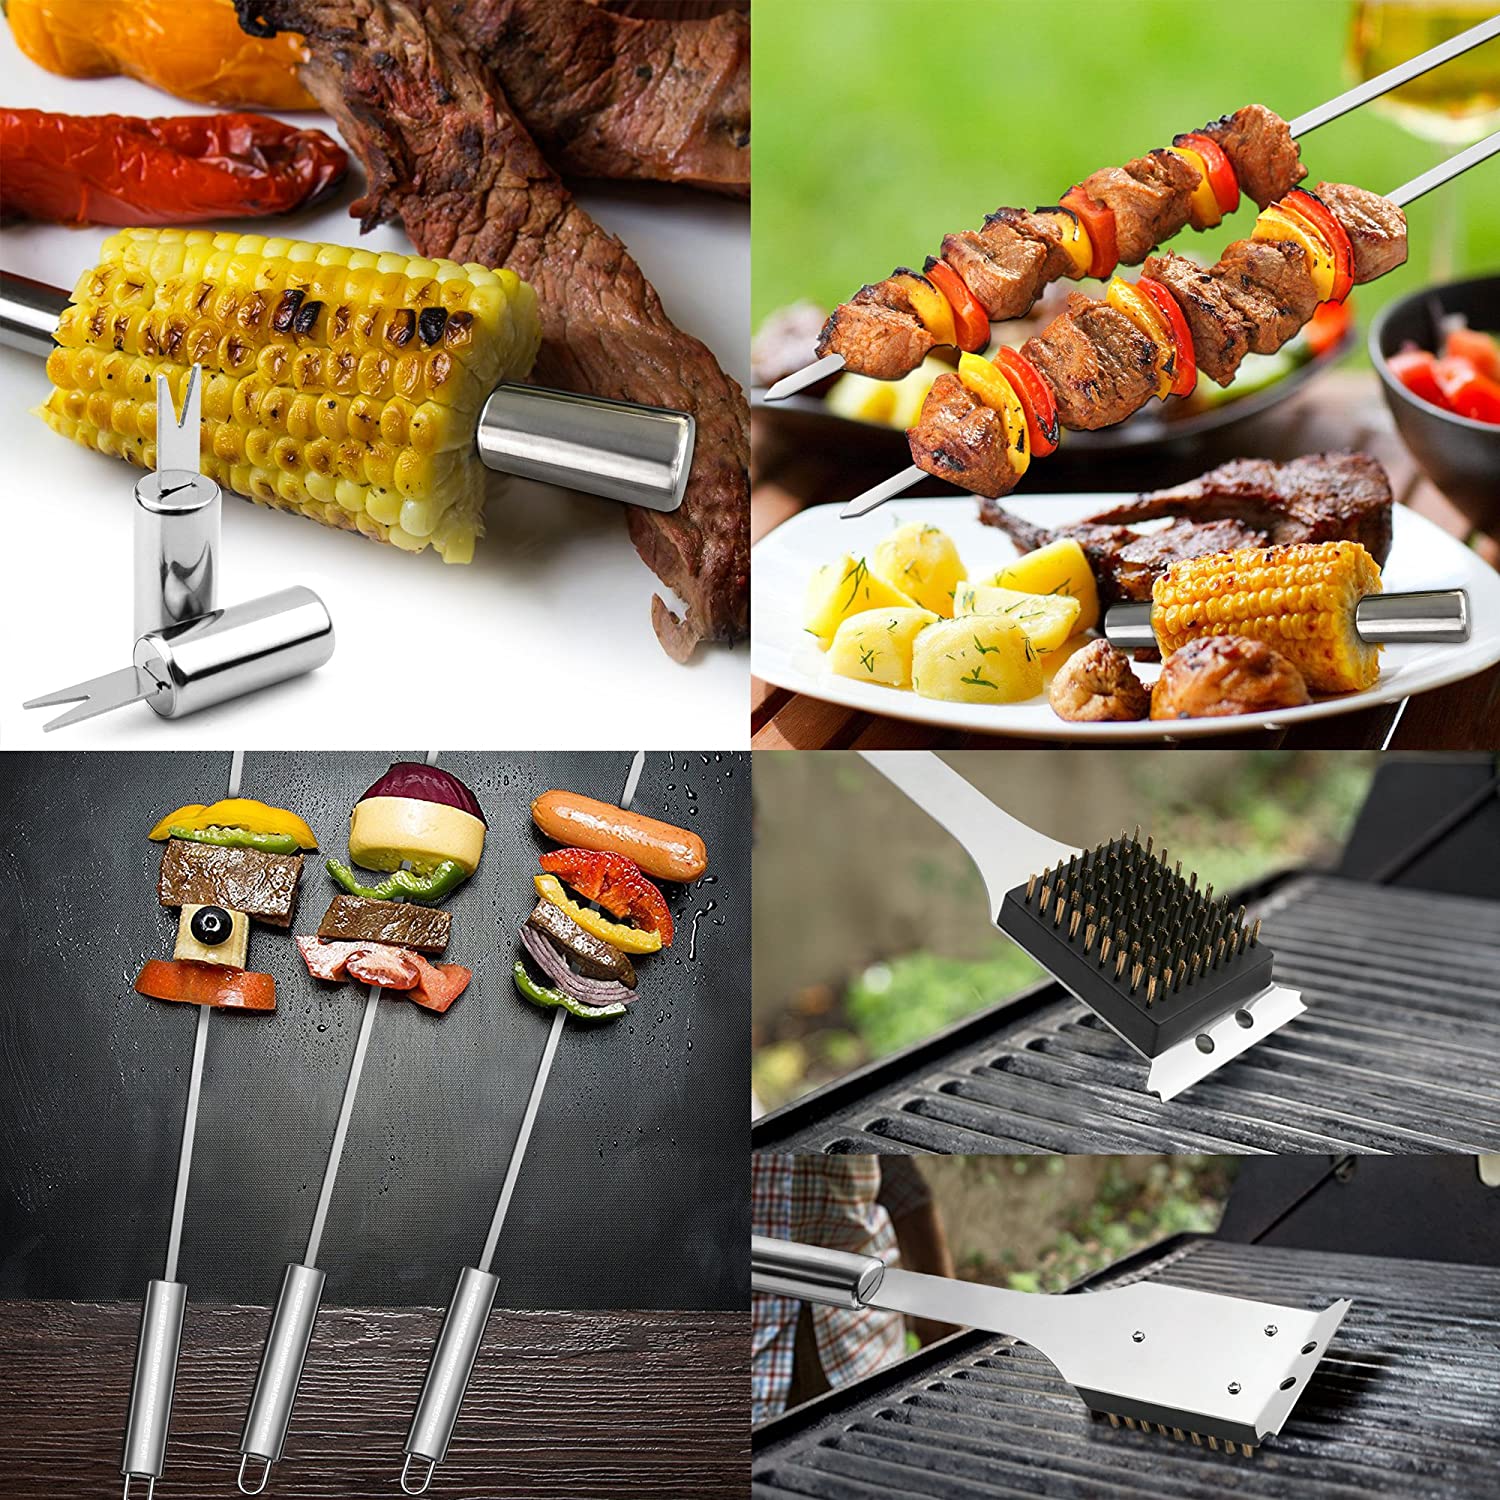  BBQ-AID 3 Piece Grill Set BBQ Accessories - Kitchen Tongs,  Metal Spatula & Fork Utensils - Heavy Duty Stainless Steel Barbecue Grill  Utensils for Outdoor Grill with Solid Sturdy Wood